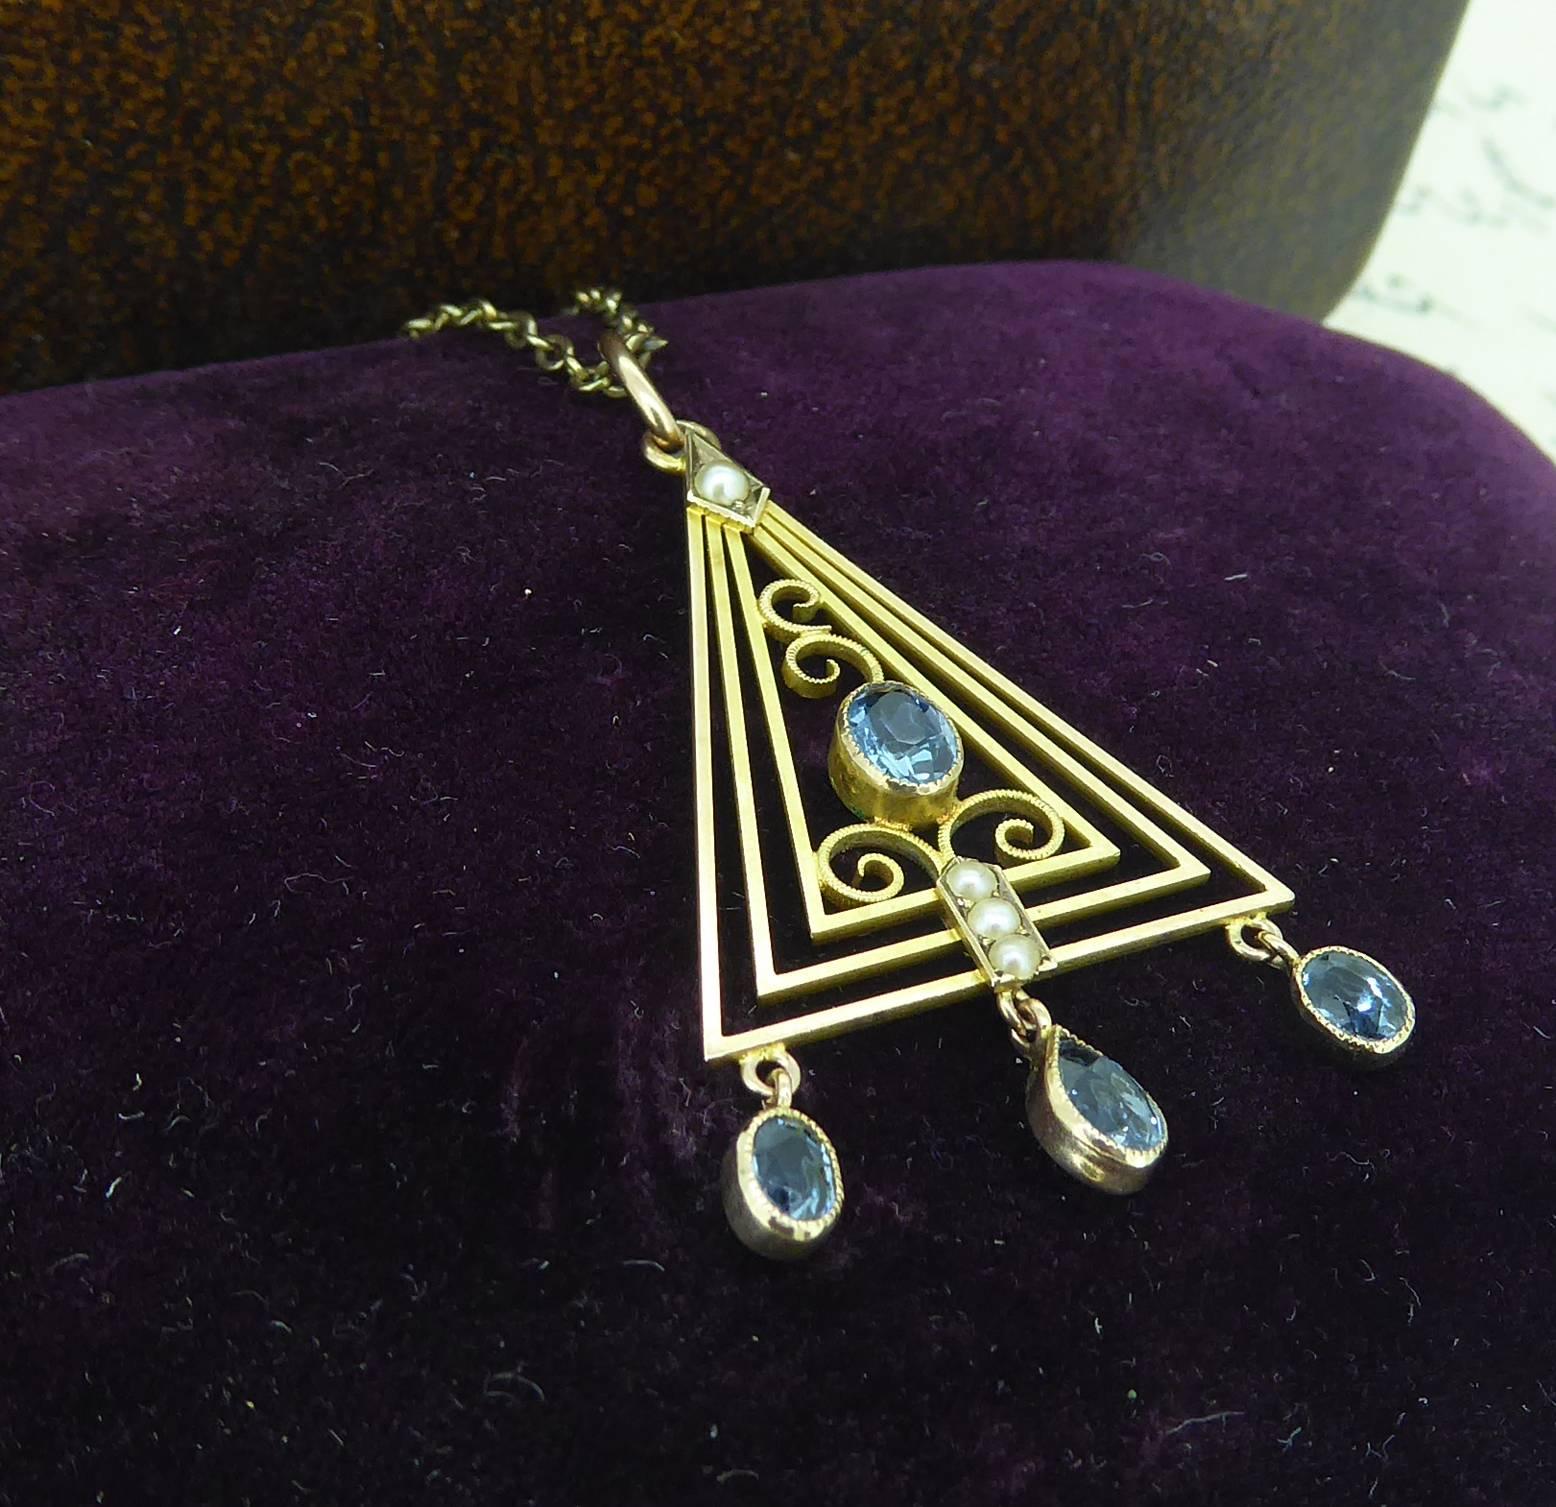 A delicious Art Deco pendant in a typical geometric/pyramid shape reminiscent of the Egyptian influence of the era.  Centrally set with an oval mixed cut aquamarine in a rub over setting with millegrain edged decoration and with gold wire curclicue